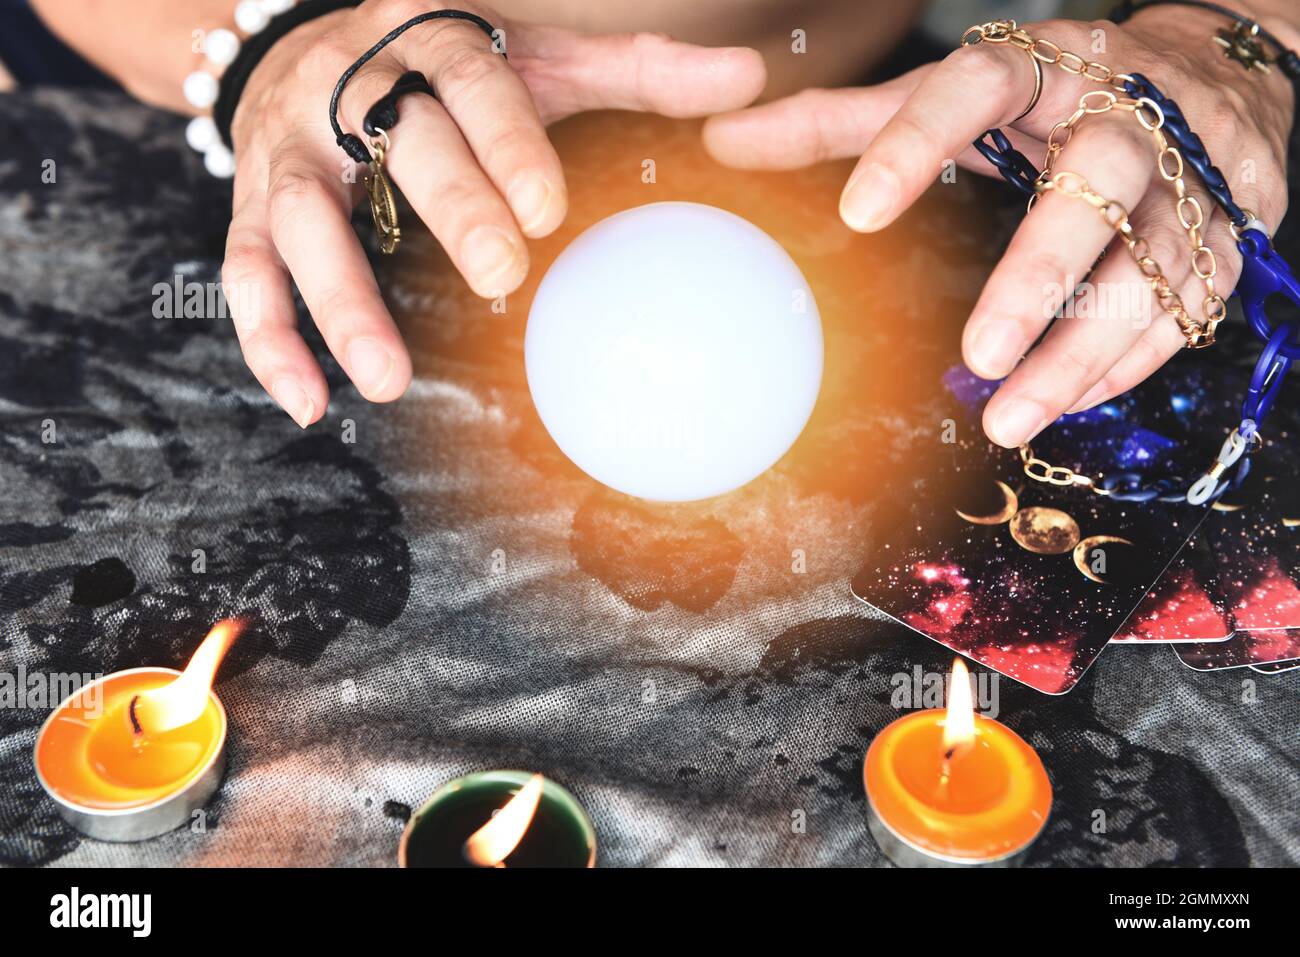 Show fortune tellers of hands holding tarot cards and tarot reader with candle light and magic Crystal ball, Performing readings magical performances, Stock Photo